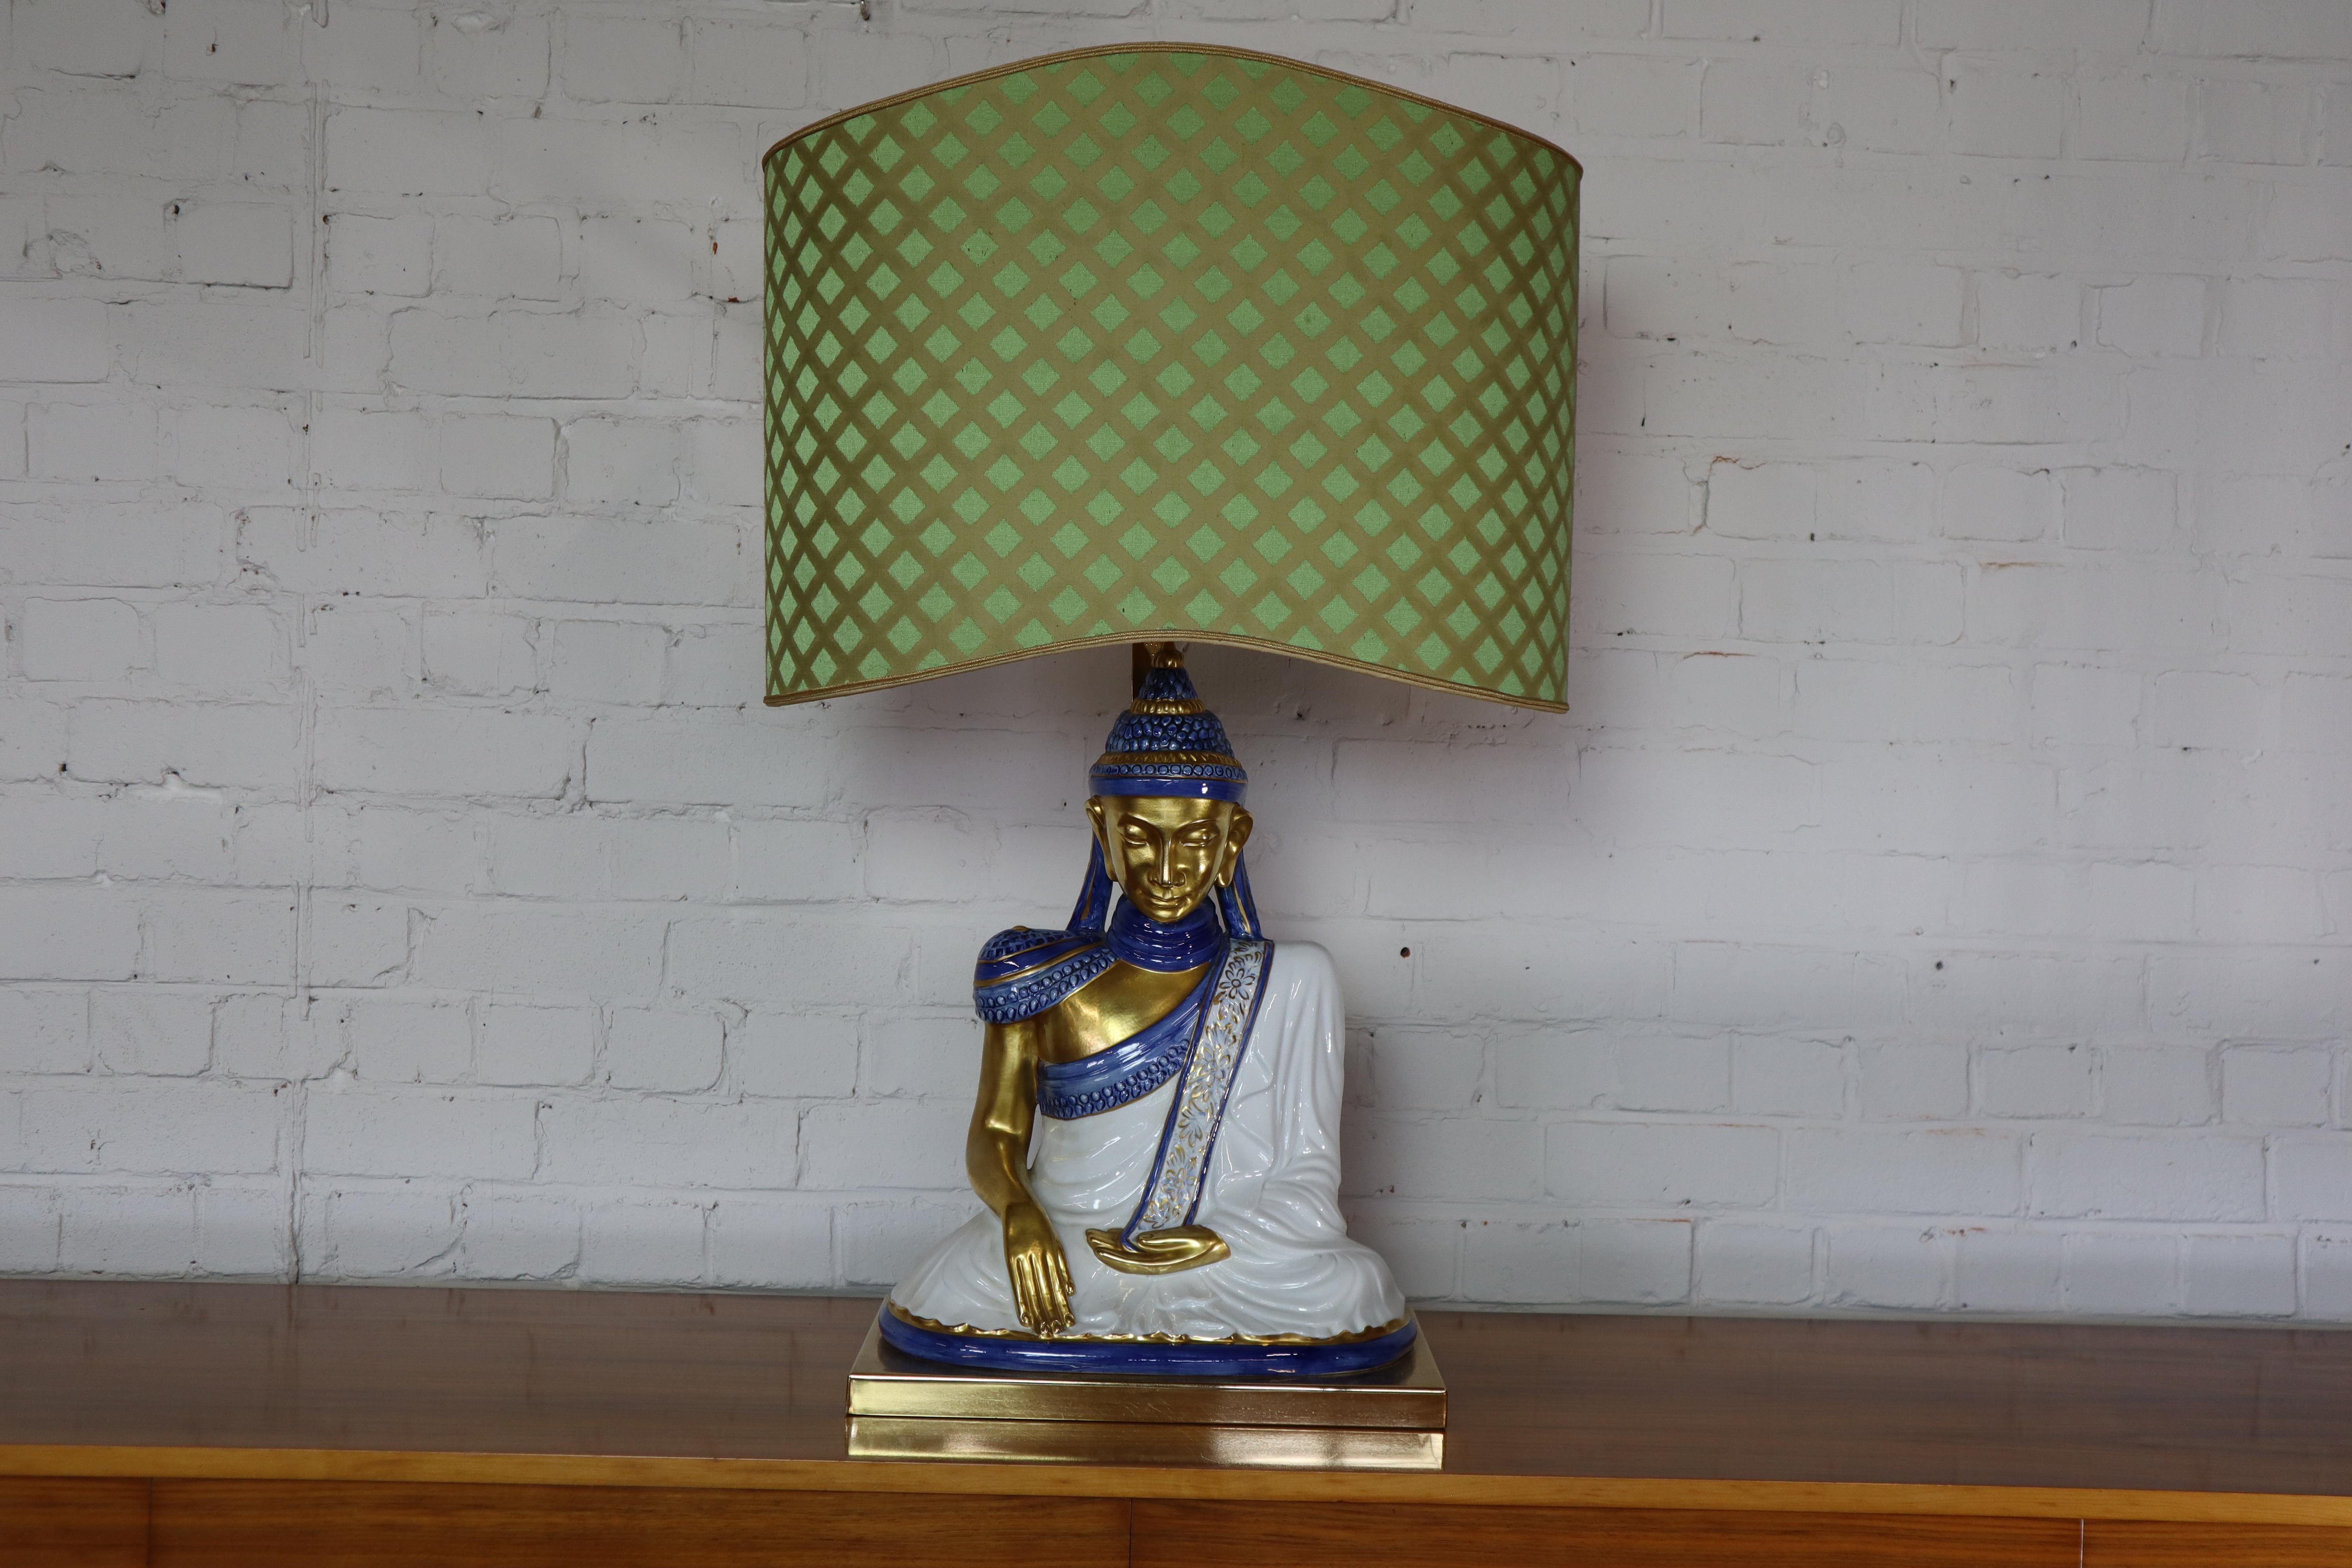 Italian lamp by Societa Porcellane Artistiche Firenze, 1970's.
Hand painted porcelain Buddha on a brass frame base. Original labeled lampshade covered with silk.
Lampshade height adjustable
Dxhxw: 25x86x53 cm